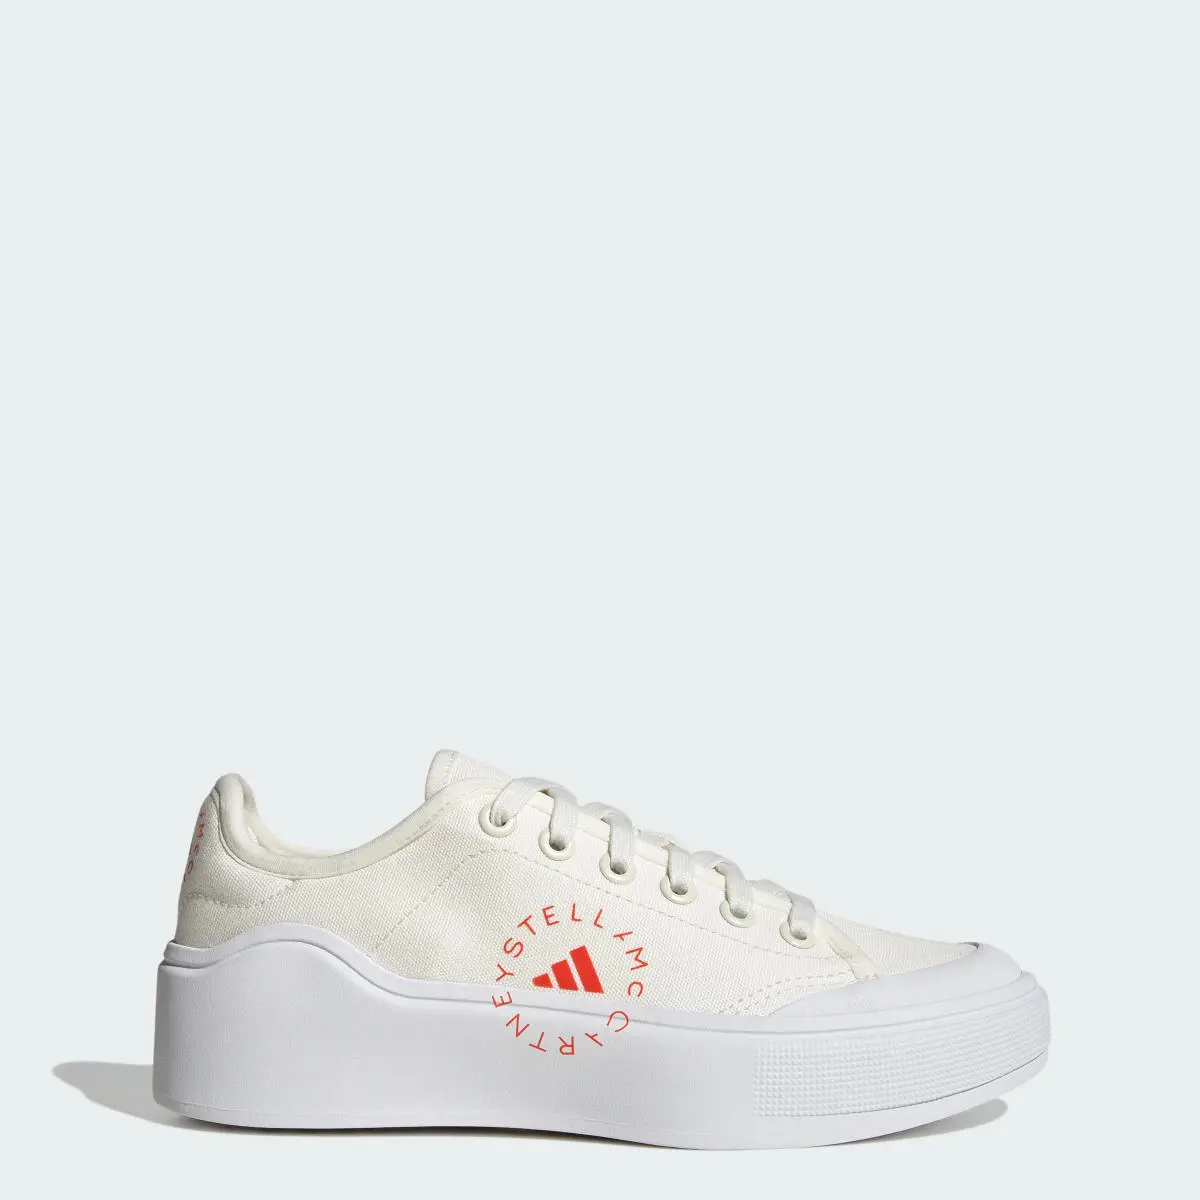 Adidas by Stella McCartney Court Shoes. 1